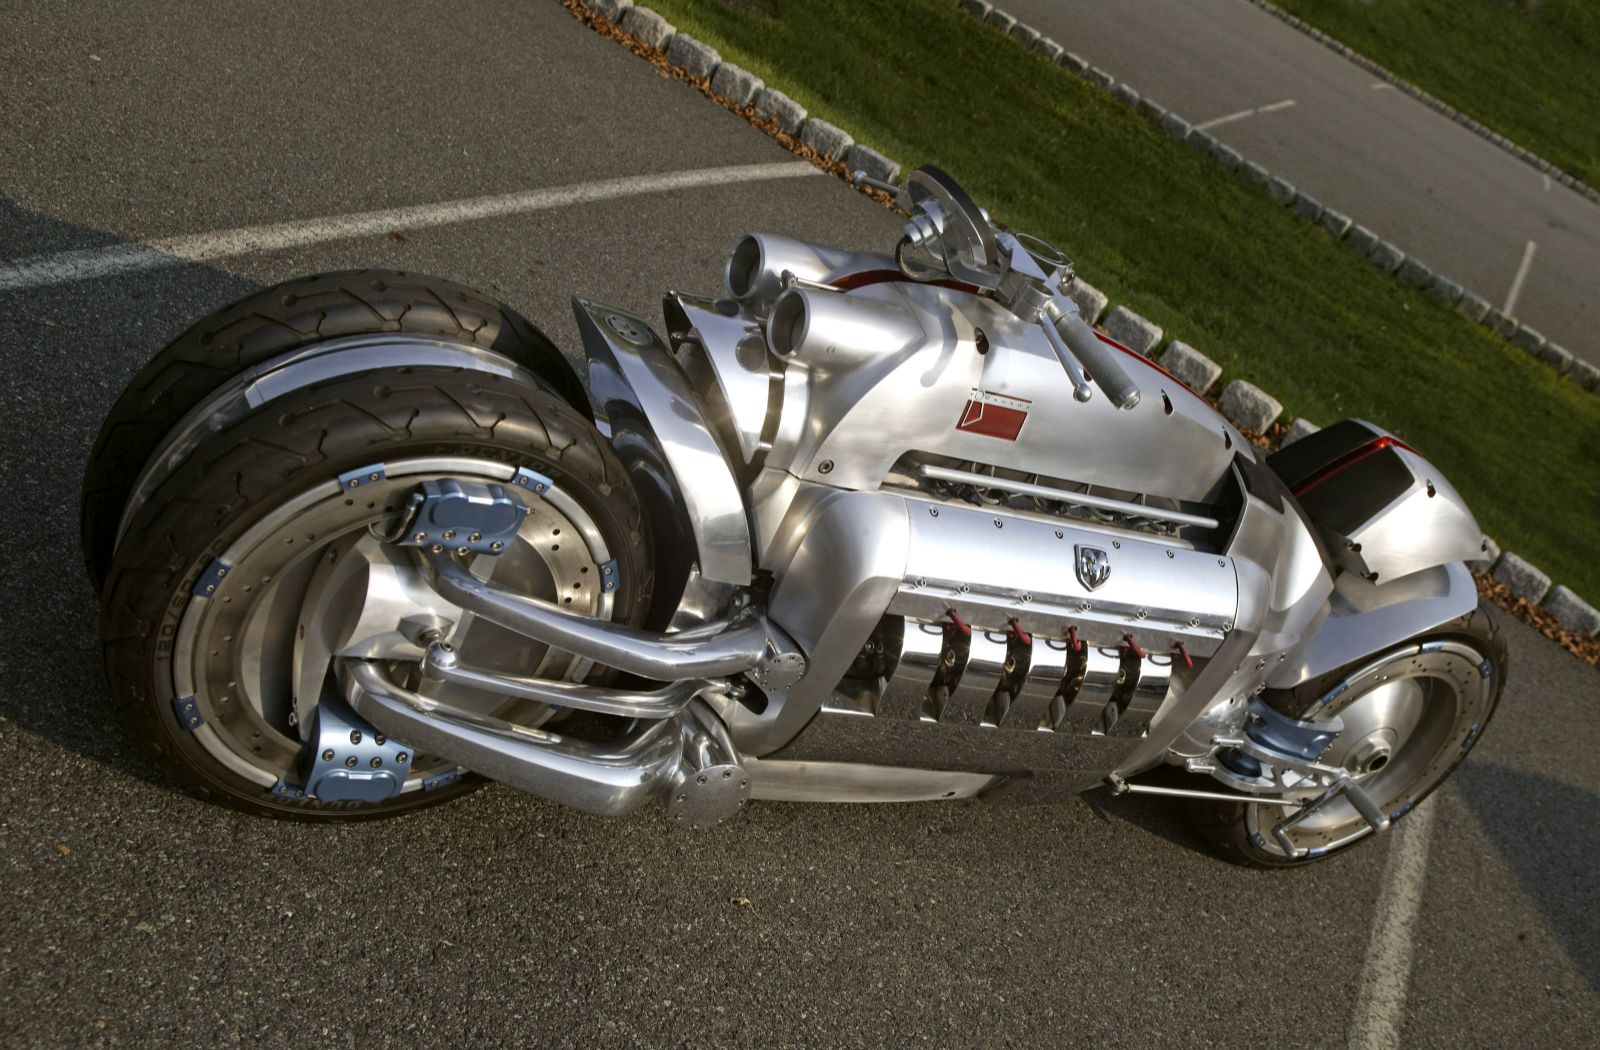 20 years ago dodge unveiled the tomahawk a v10 powered bike that s still insane today 5